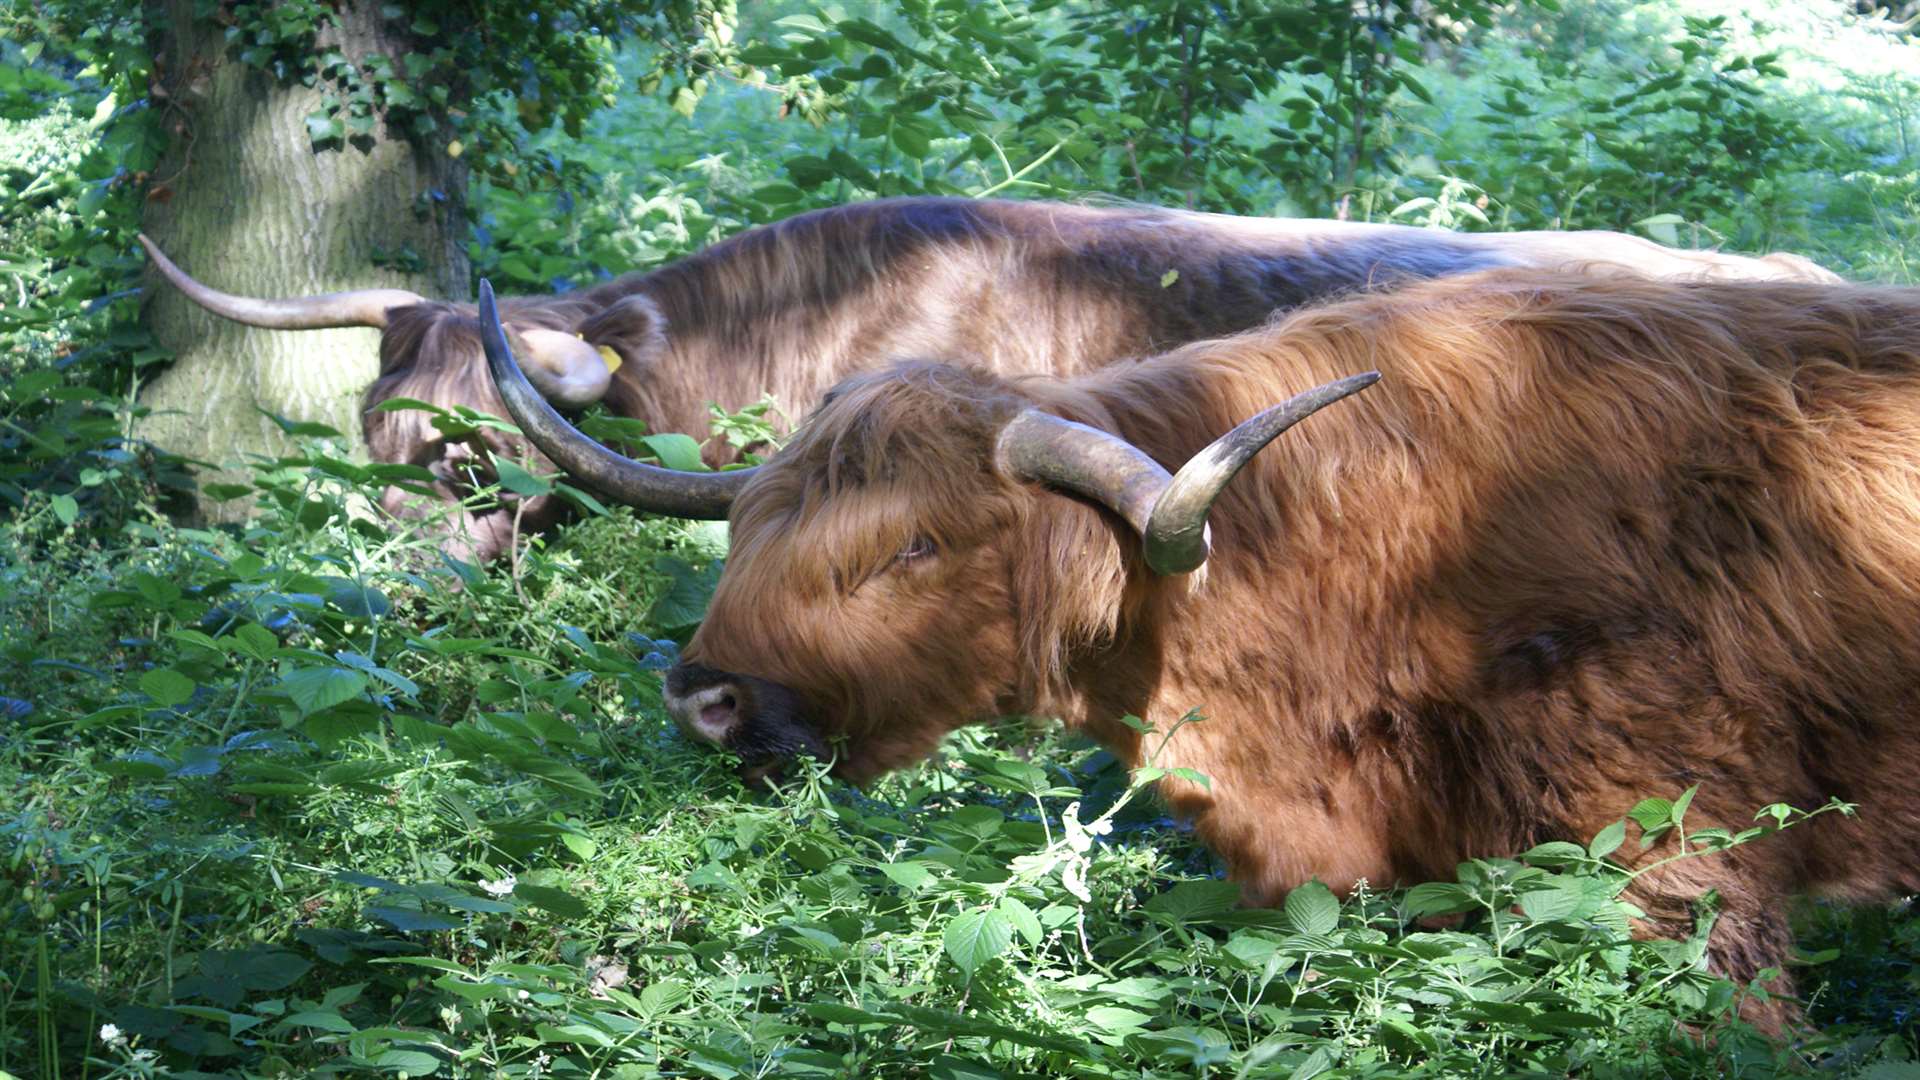 Highland cattle have been introduced at Ashford Warren and Hoads Wood